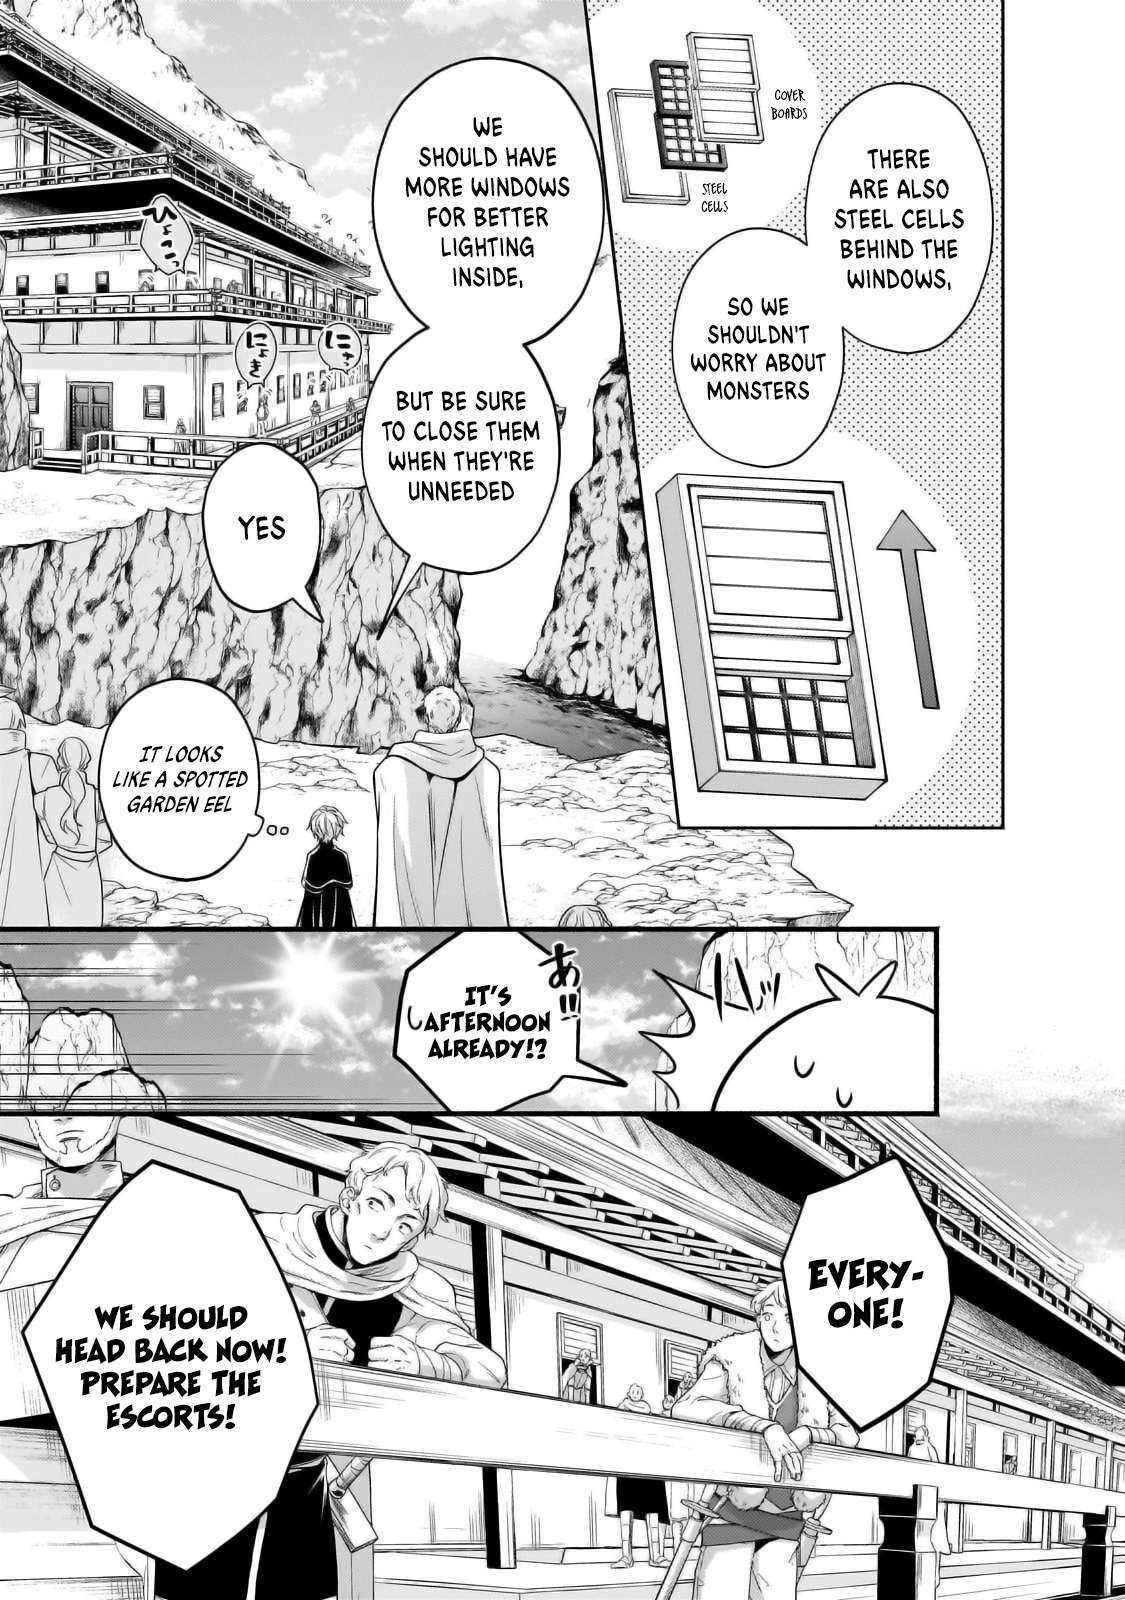 Easygoing Territory Defense By The Optimistic Lord: Production Magic Turns A Nameless Village Into The Strongest Fortified City - chapter 28.2 - #5